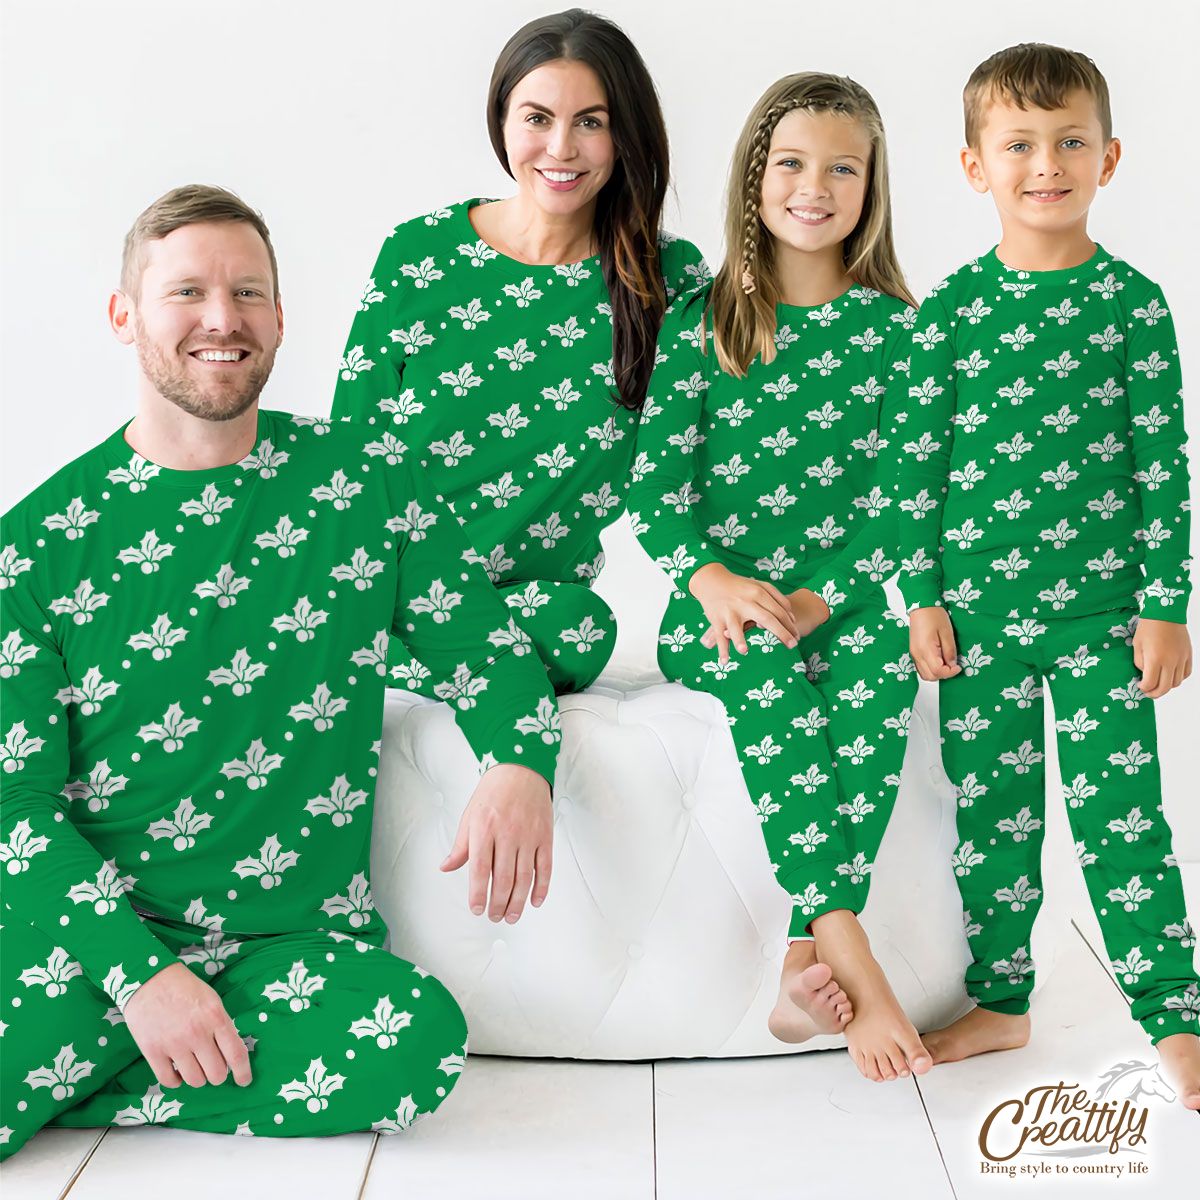 Holly Tree Pattern, Holly Leaf, American Holly Tree On Green Pajamas